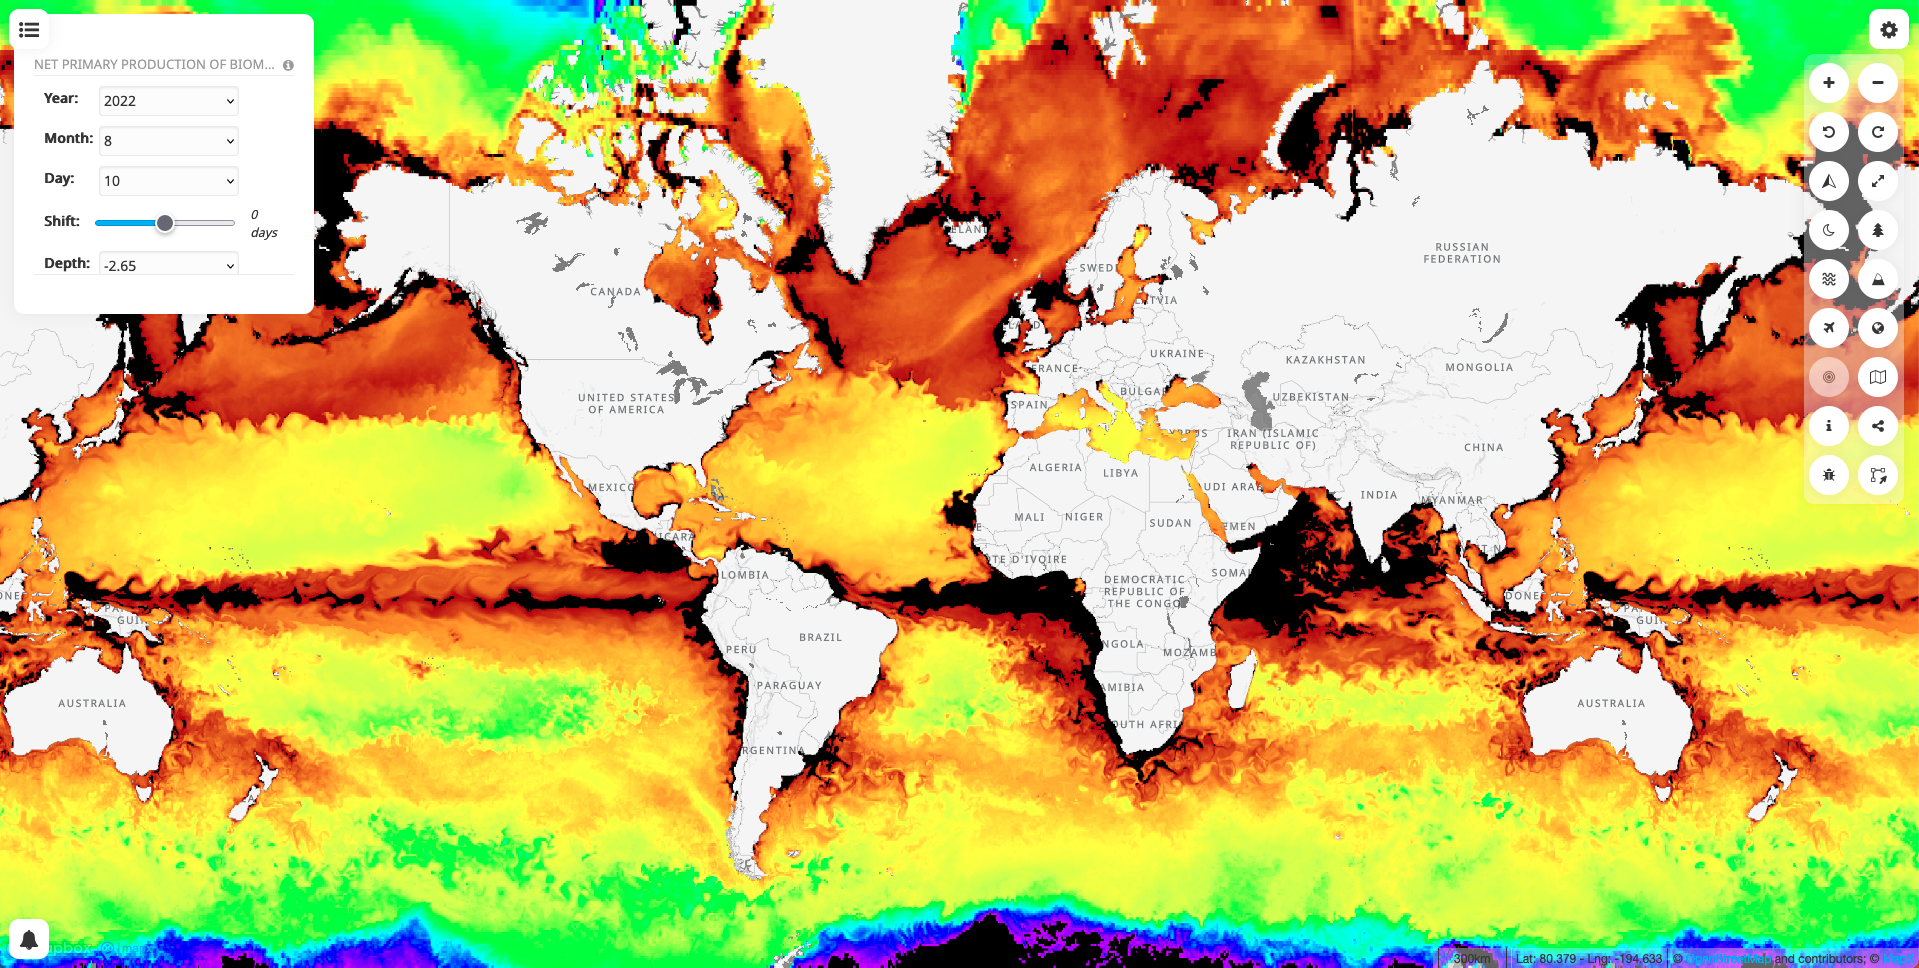 17 new datasets from Marine Copernicus Services published in MapX